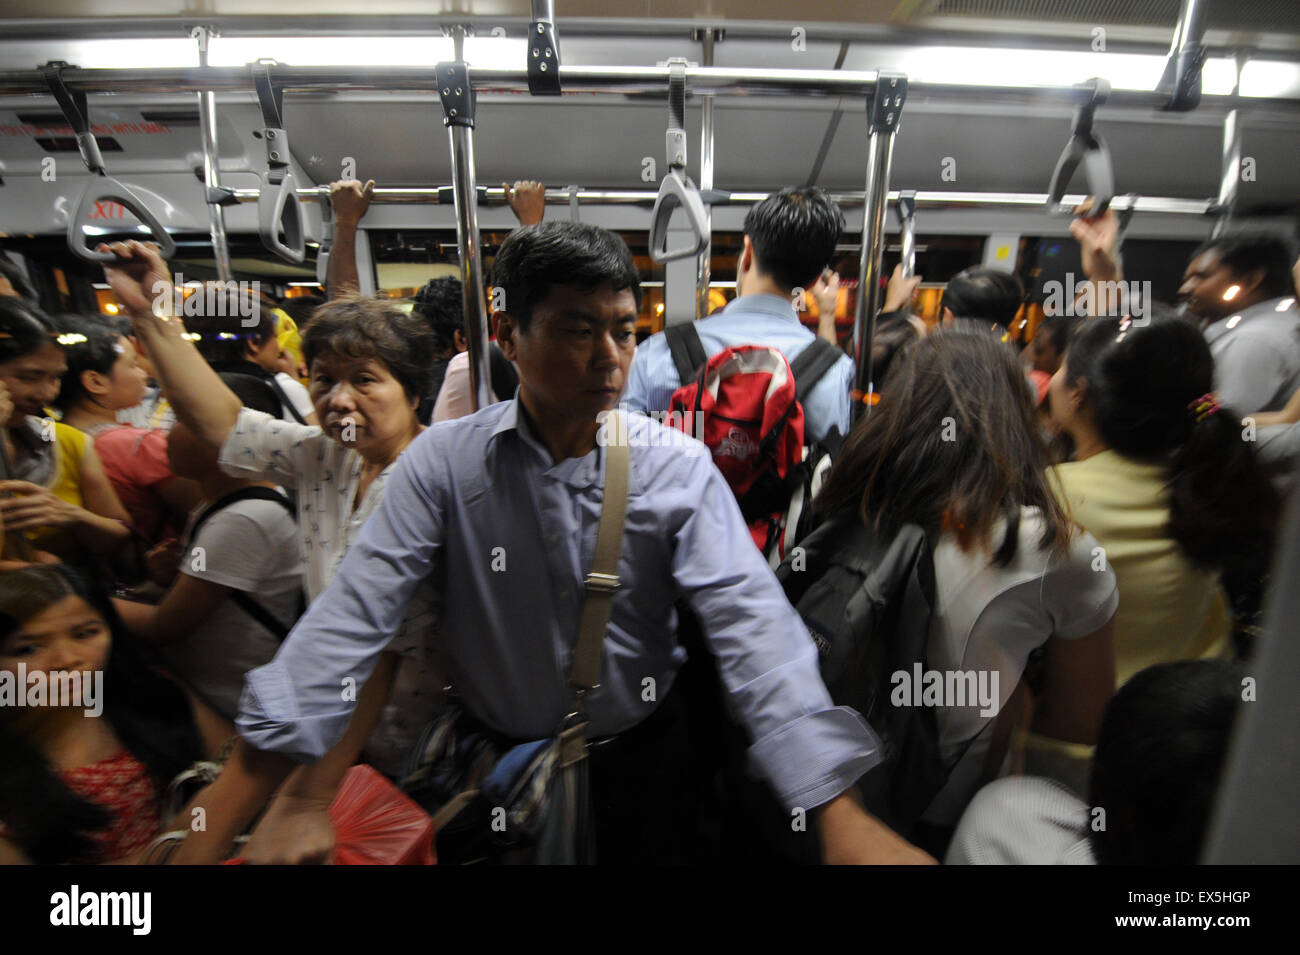 Singapore. 7th July, 2015. People squeeze onto a bus near Singapore's Dhoby Ghaut MRT Station on July 7, 2015. Train services on Singapore's North-South and East-West MRT Lines were disrupted at evening peak hours due to electrical malfunction on Tuesday, the second time after the East-West MRT Line malfunction in March. © Then Chih Wey/Xinhua/Alamy Live News Stock Photo